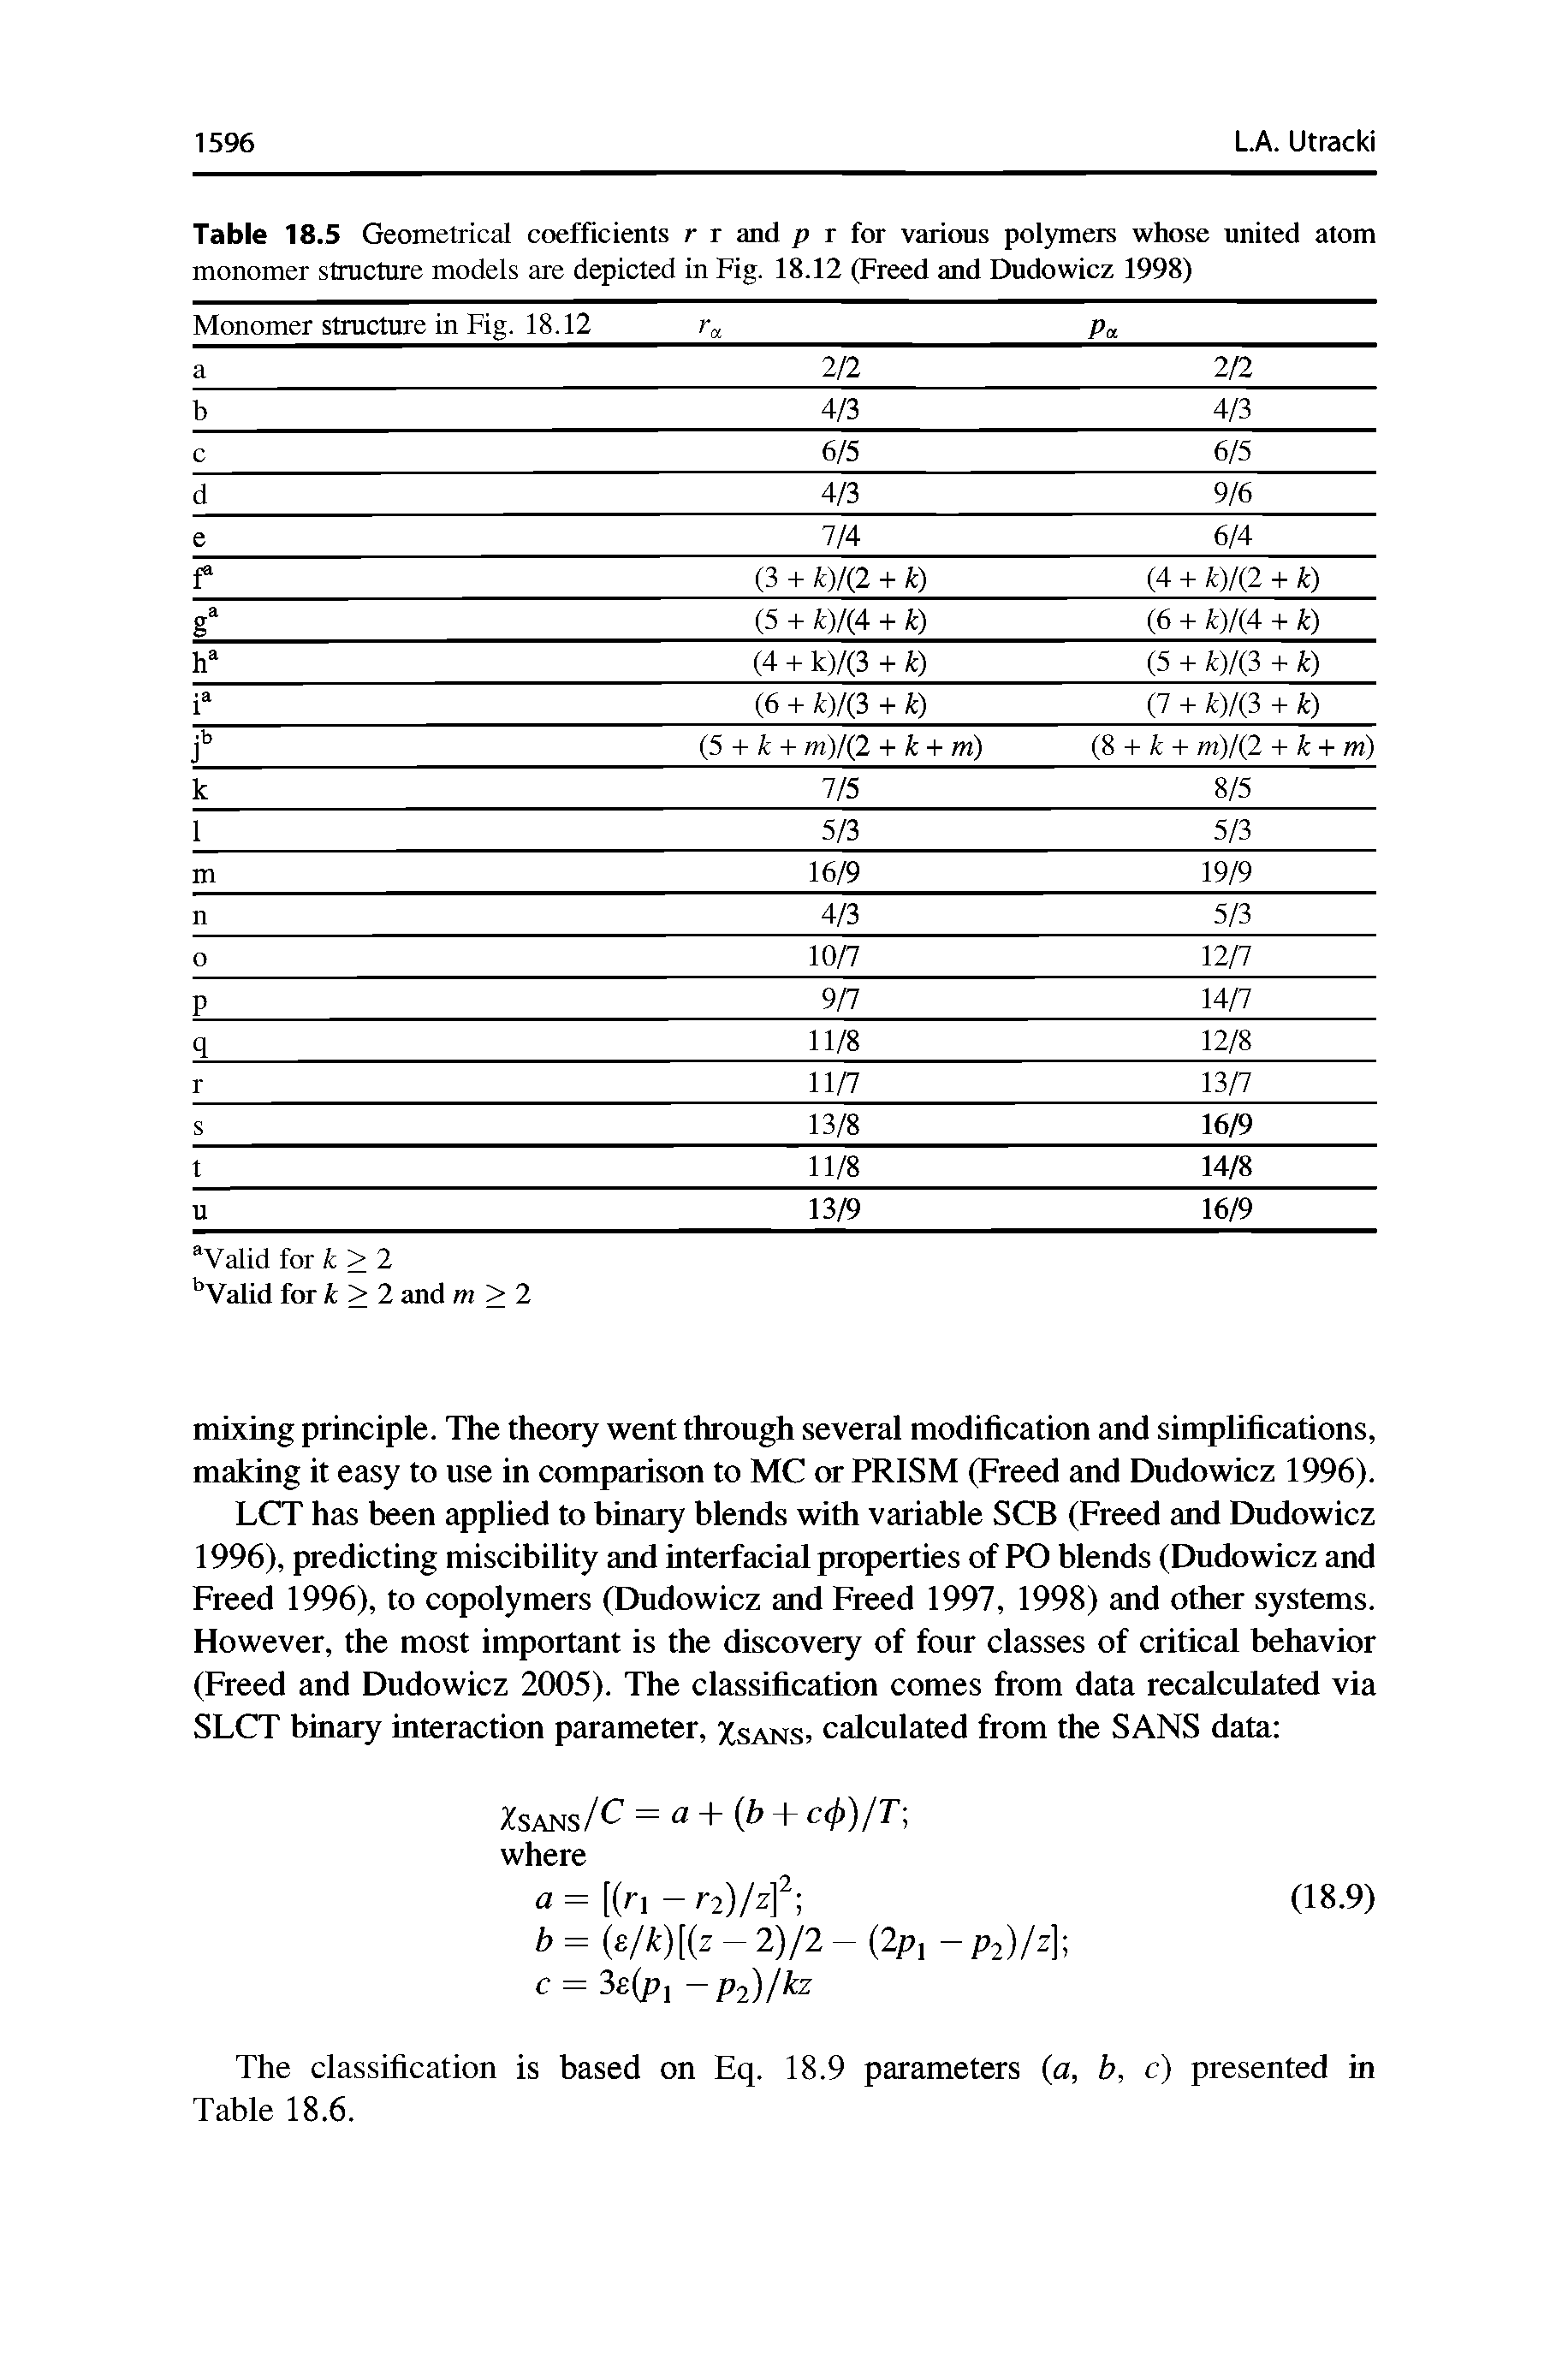 Table 18.5 Geometrical coefficients monomer structure models are depicted r r and p r for various polymers whose united atom in Fig. 18.12 (Freed and Dudowicz 1998) ...